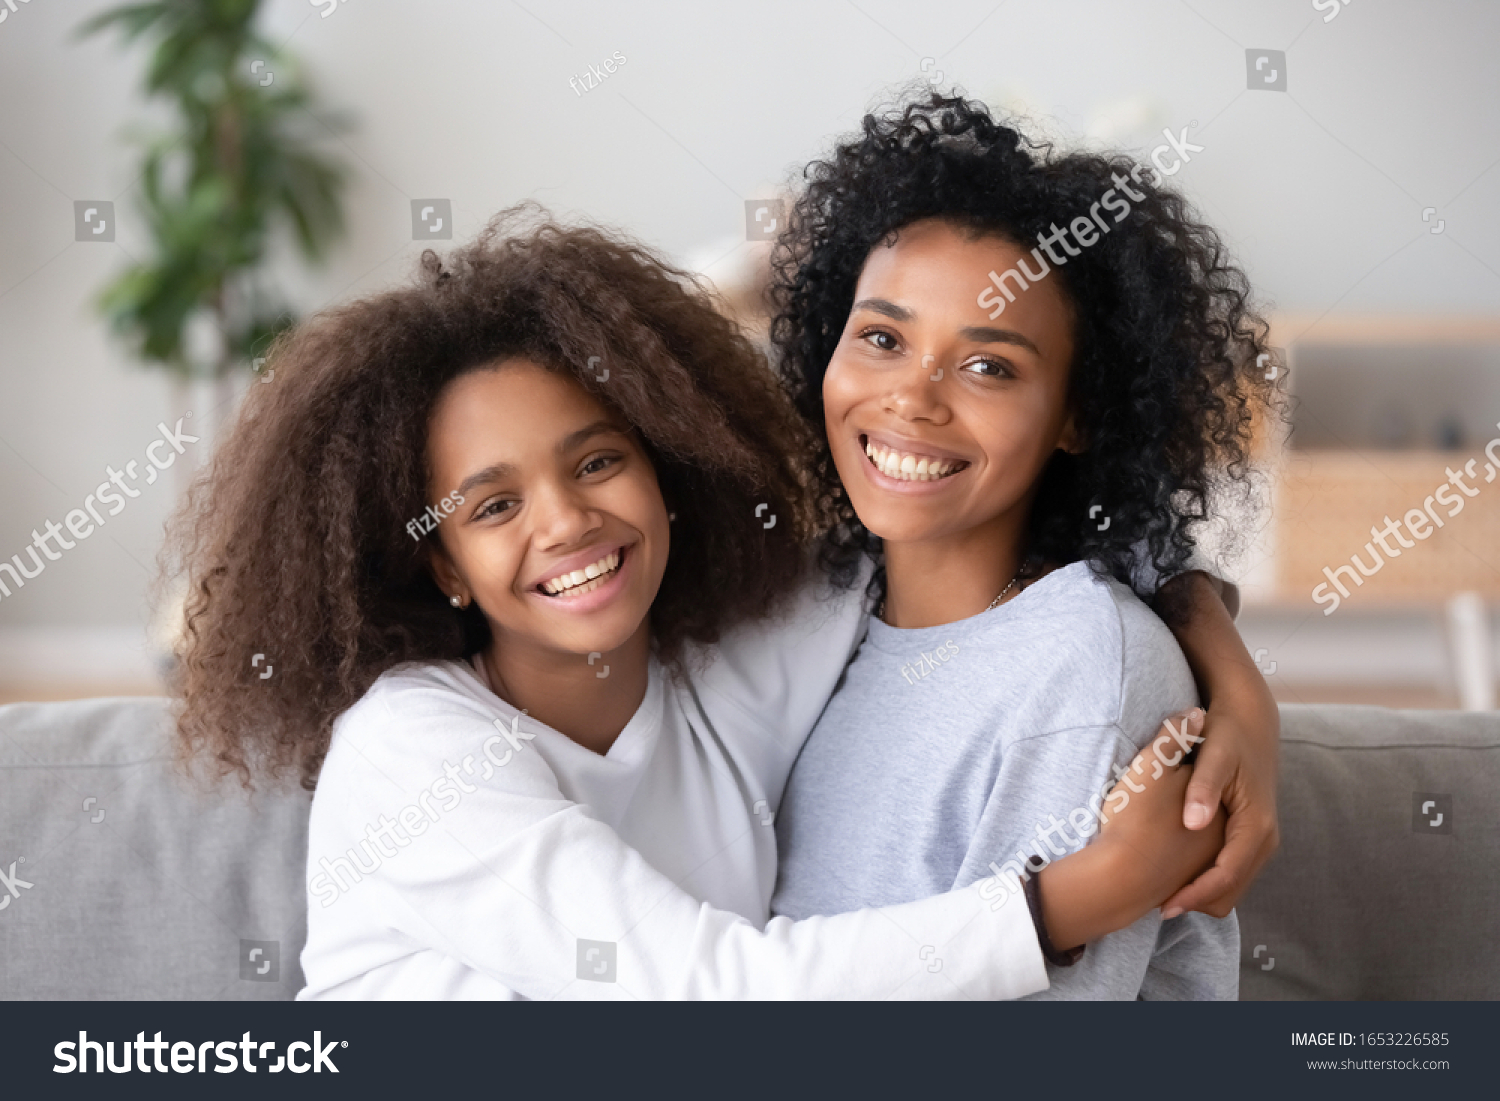 Happy African American Family Loving Single Stock Photo 1653226585 Shutters...